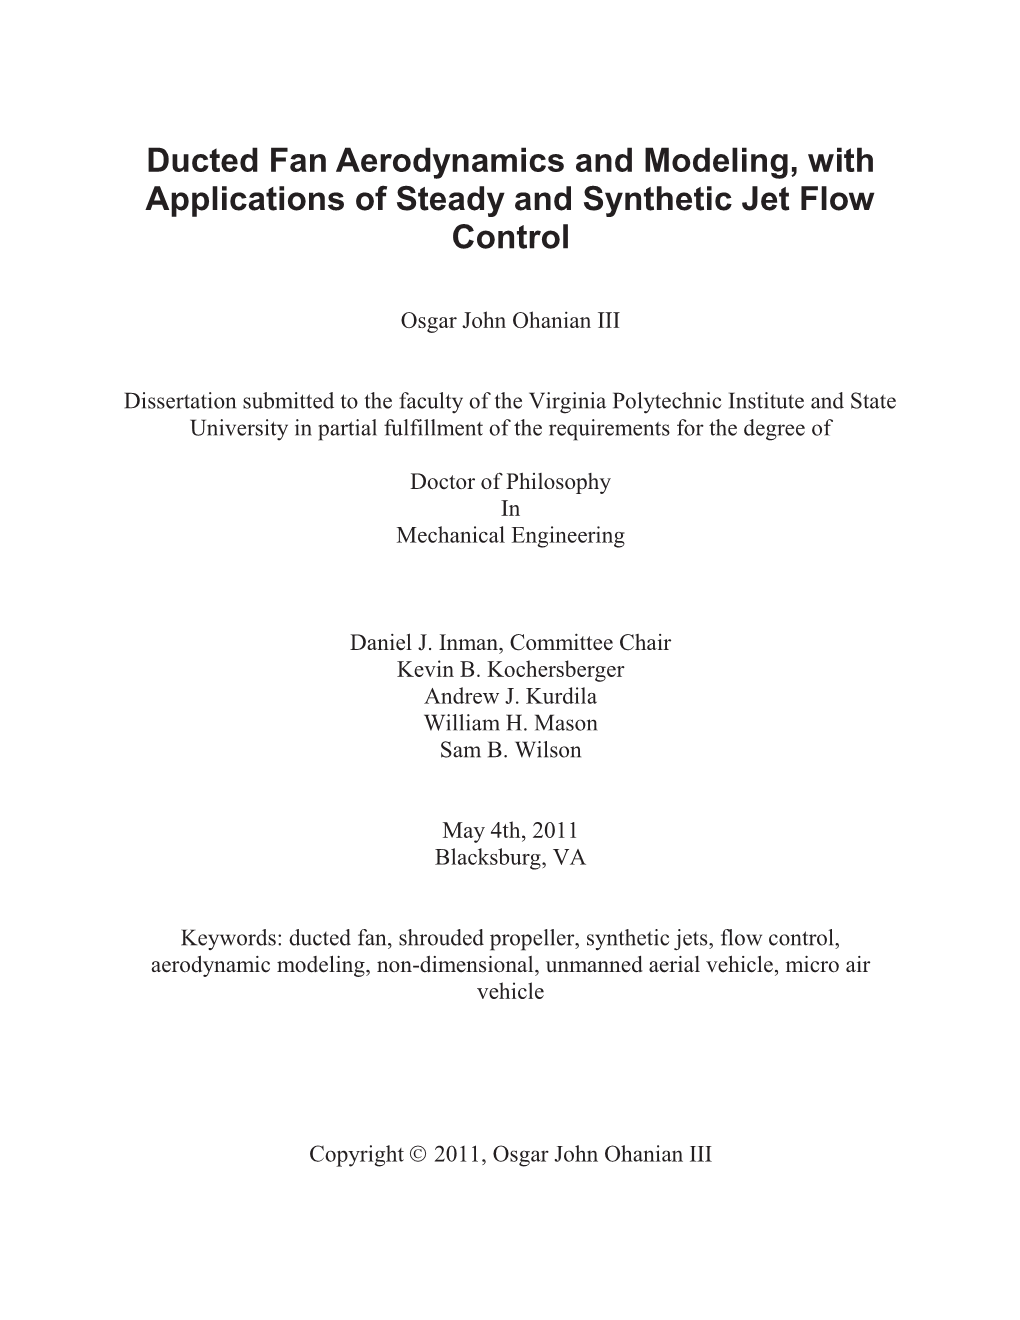 Ducted Fan Aerodynamics and Modeling, with Applications of Steady and Synthetic Jet Flow Control